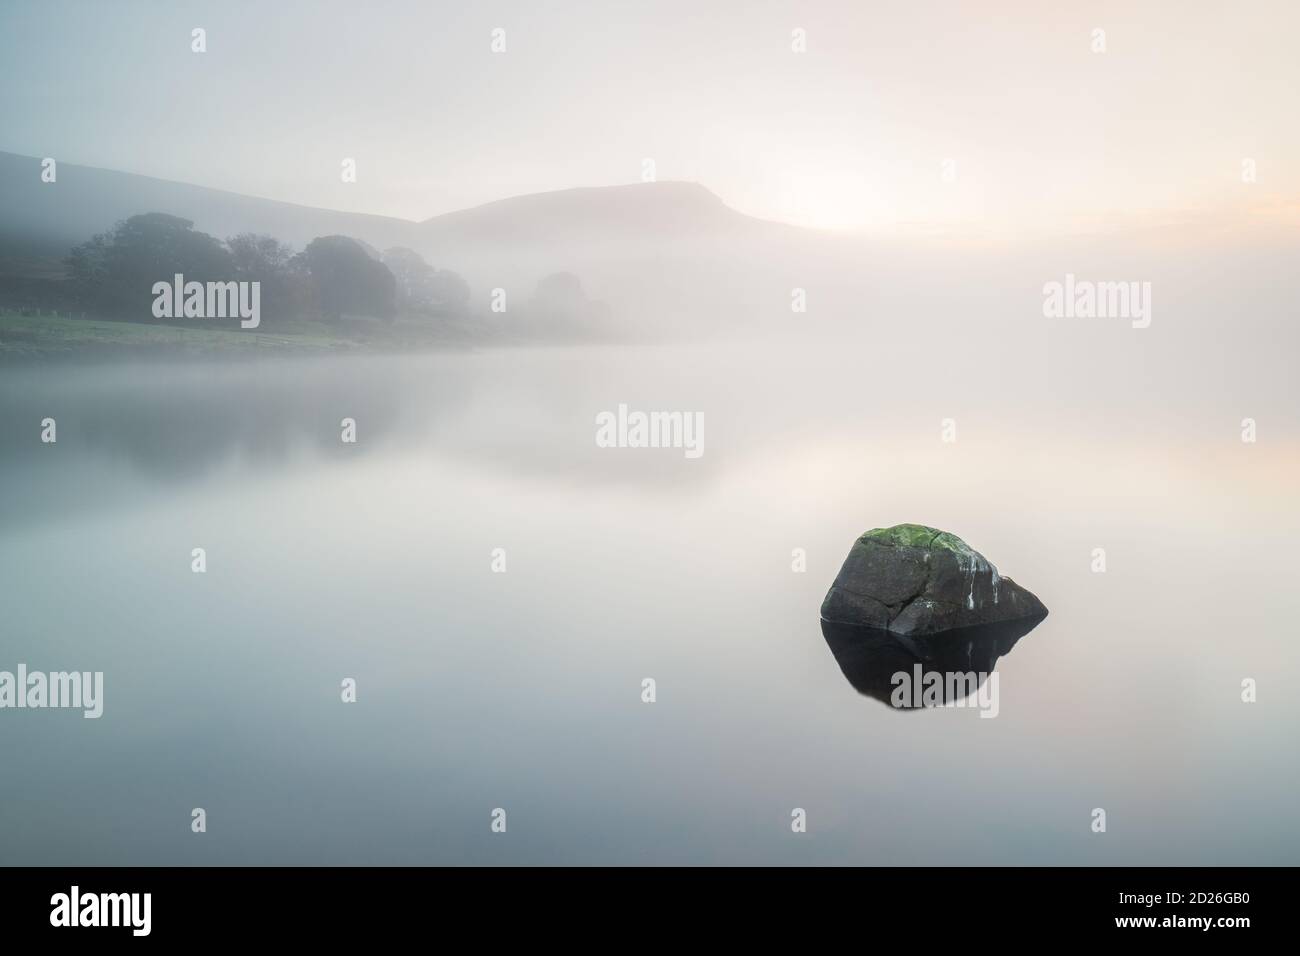 Embsay Crag peeks through the fog floating over Embsay Reservoir on a calm September morning with low visibility creating a minimal and tranquil scene. Stock Photo